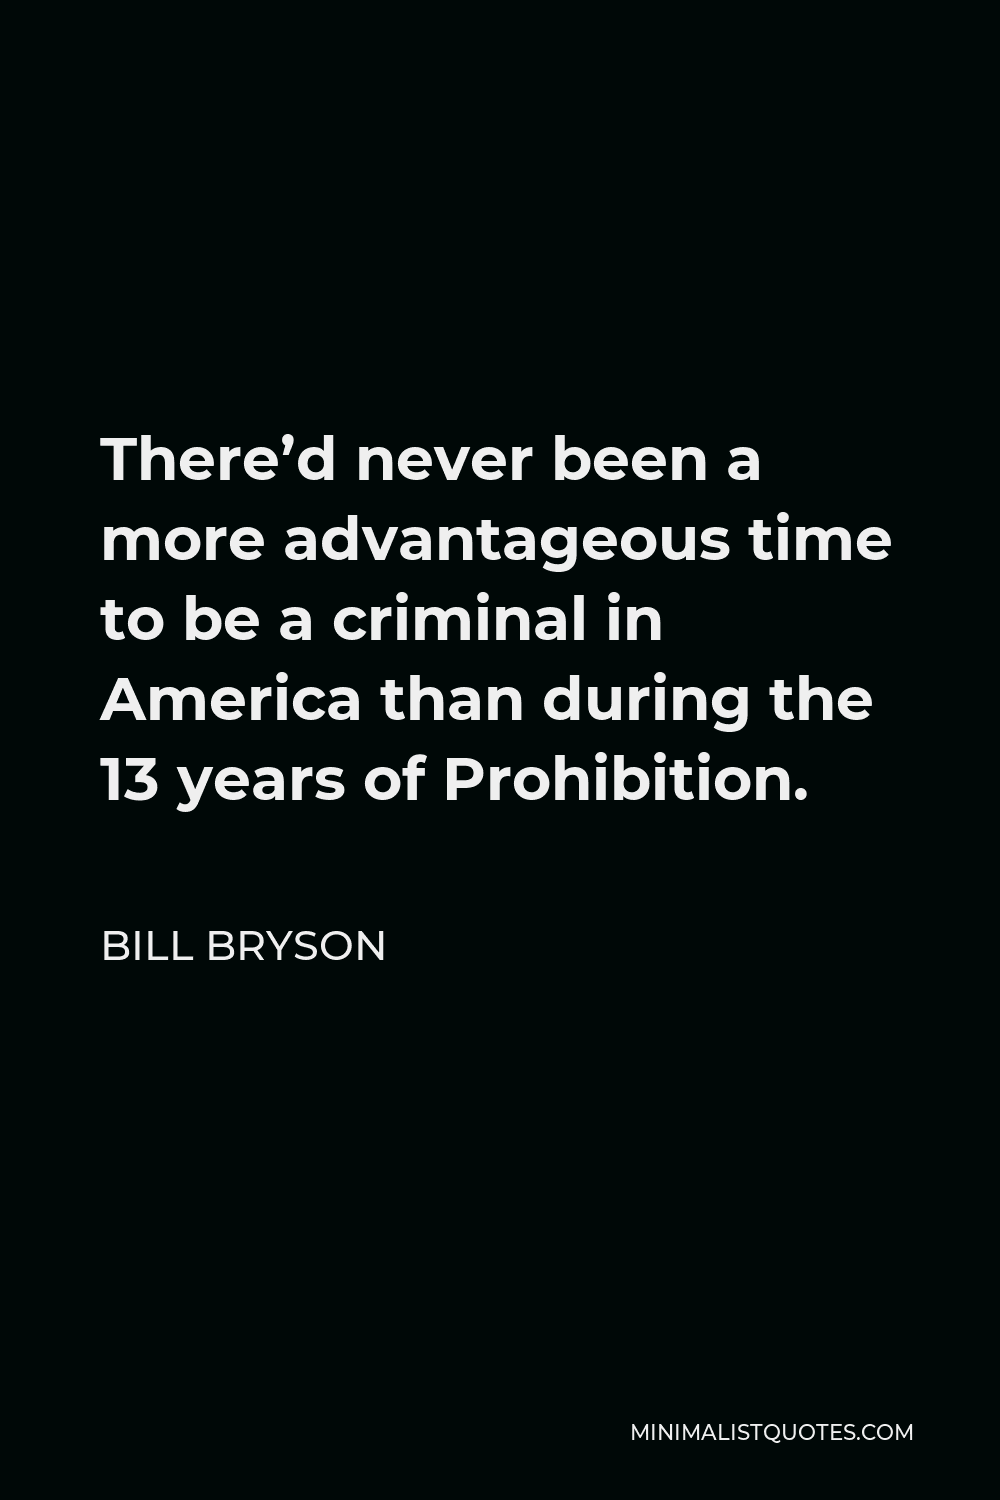 Bill Bryson Quote - There’d never been a more advantageous time to be a criminal in America than during the 13 years of Prohibition.